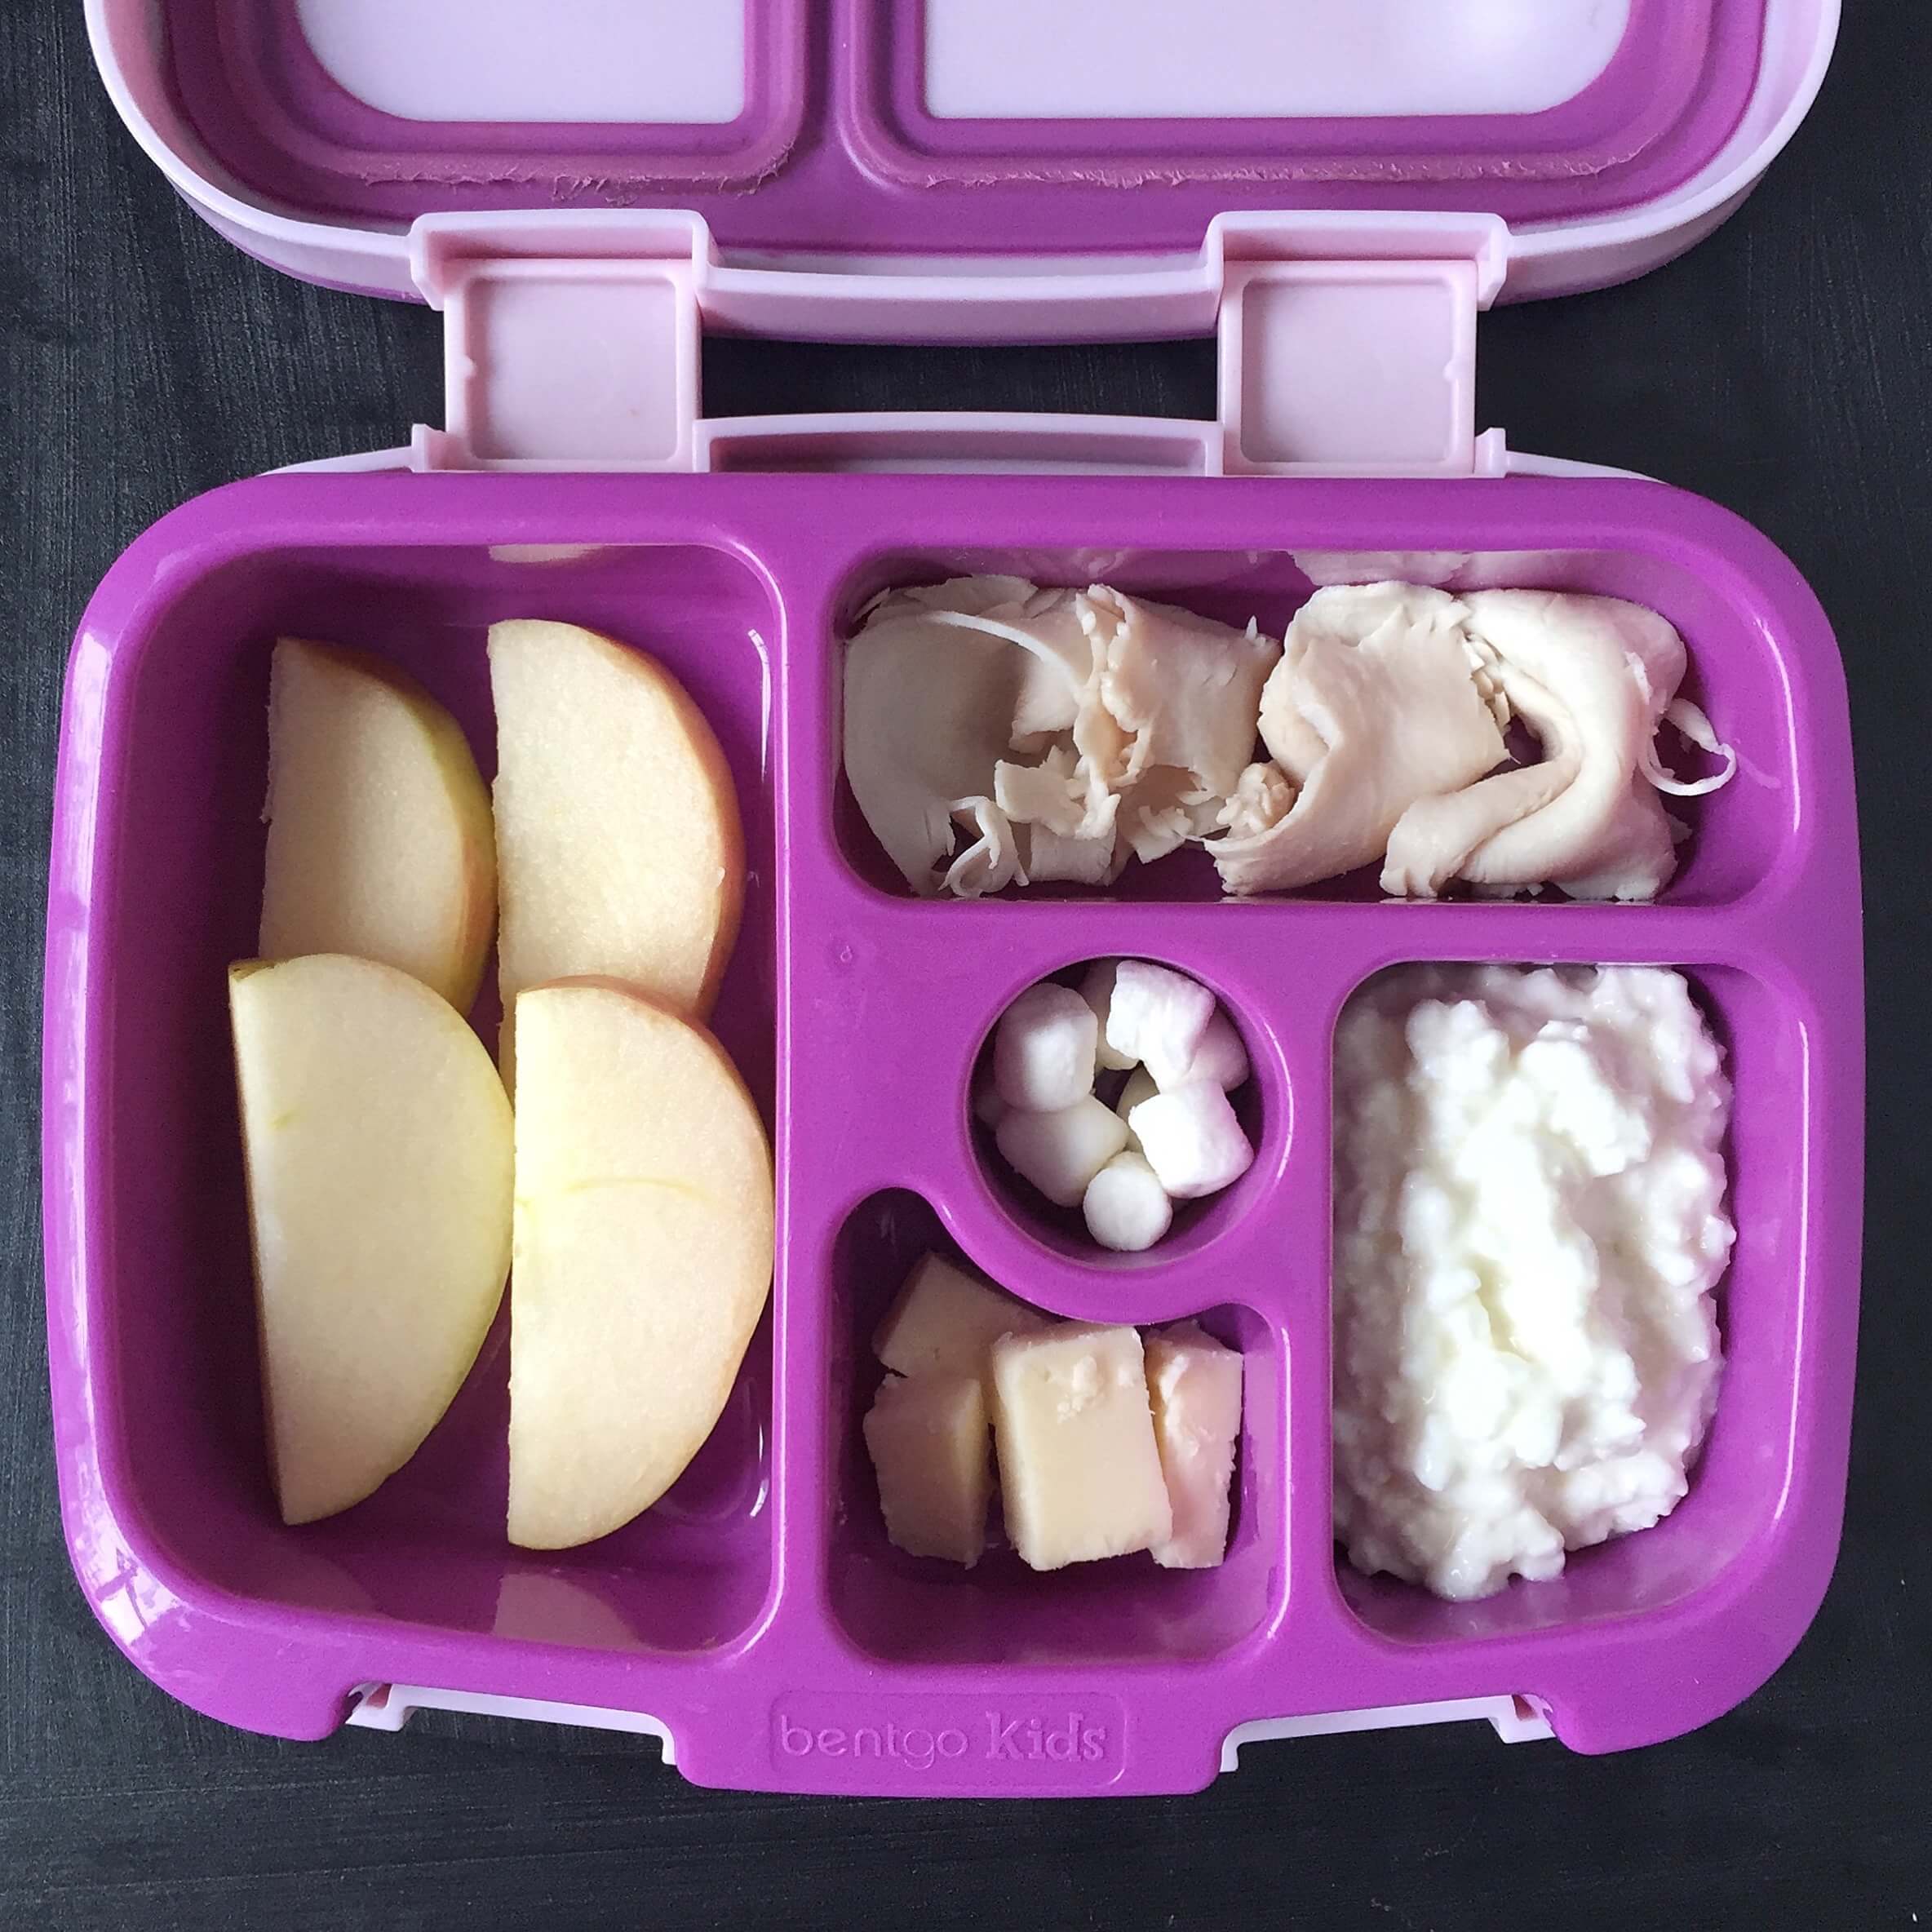 10 More Healthy Lunch Ideas for Kids (for the School Lunch Box or Home) -  Kristine's Kitchen